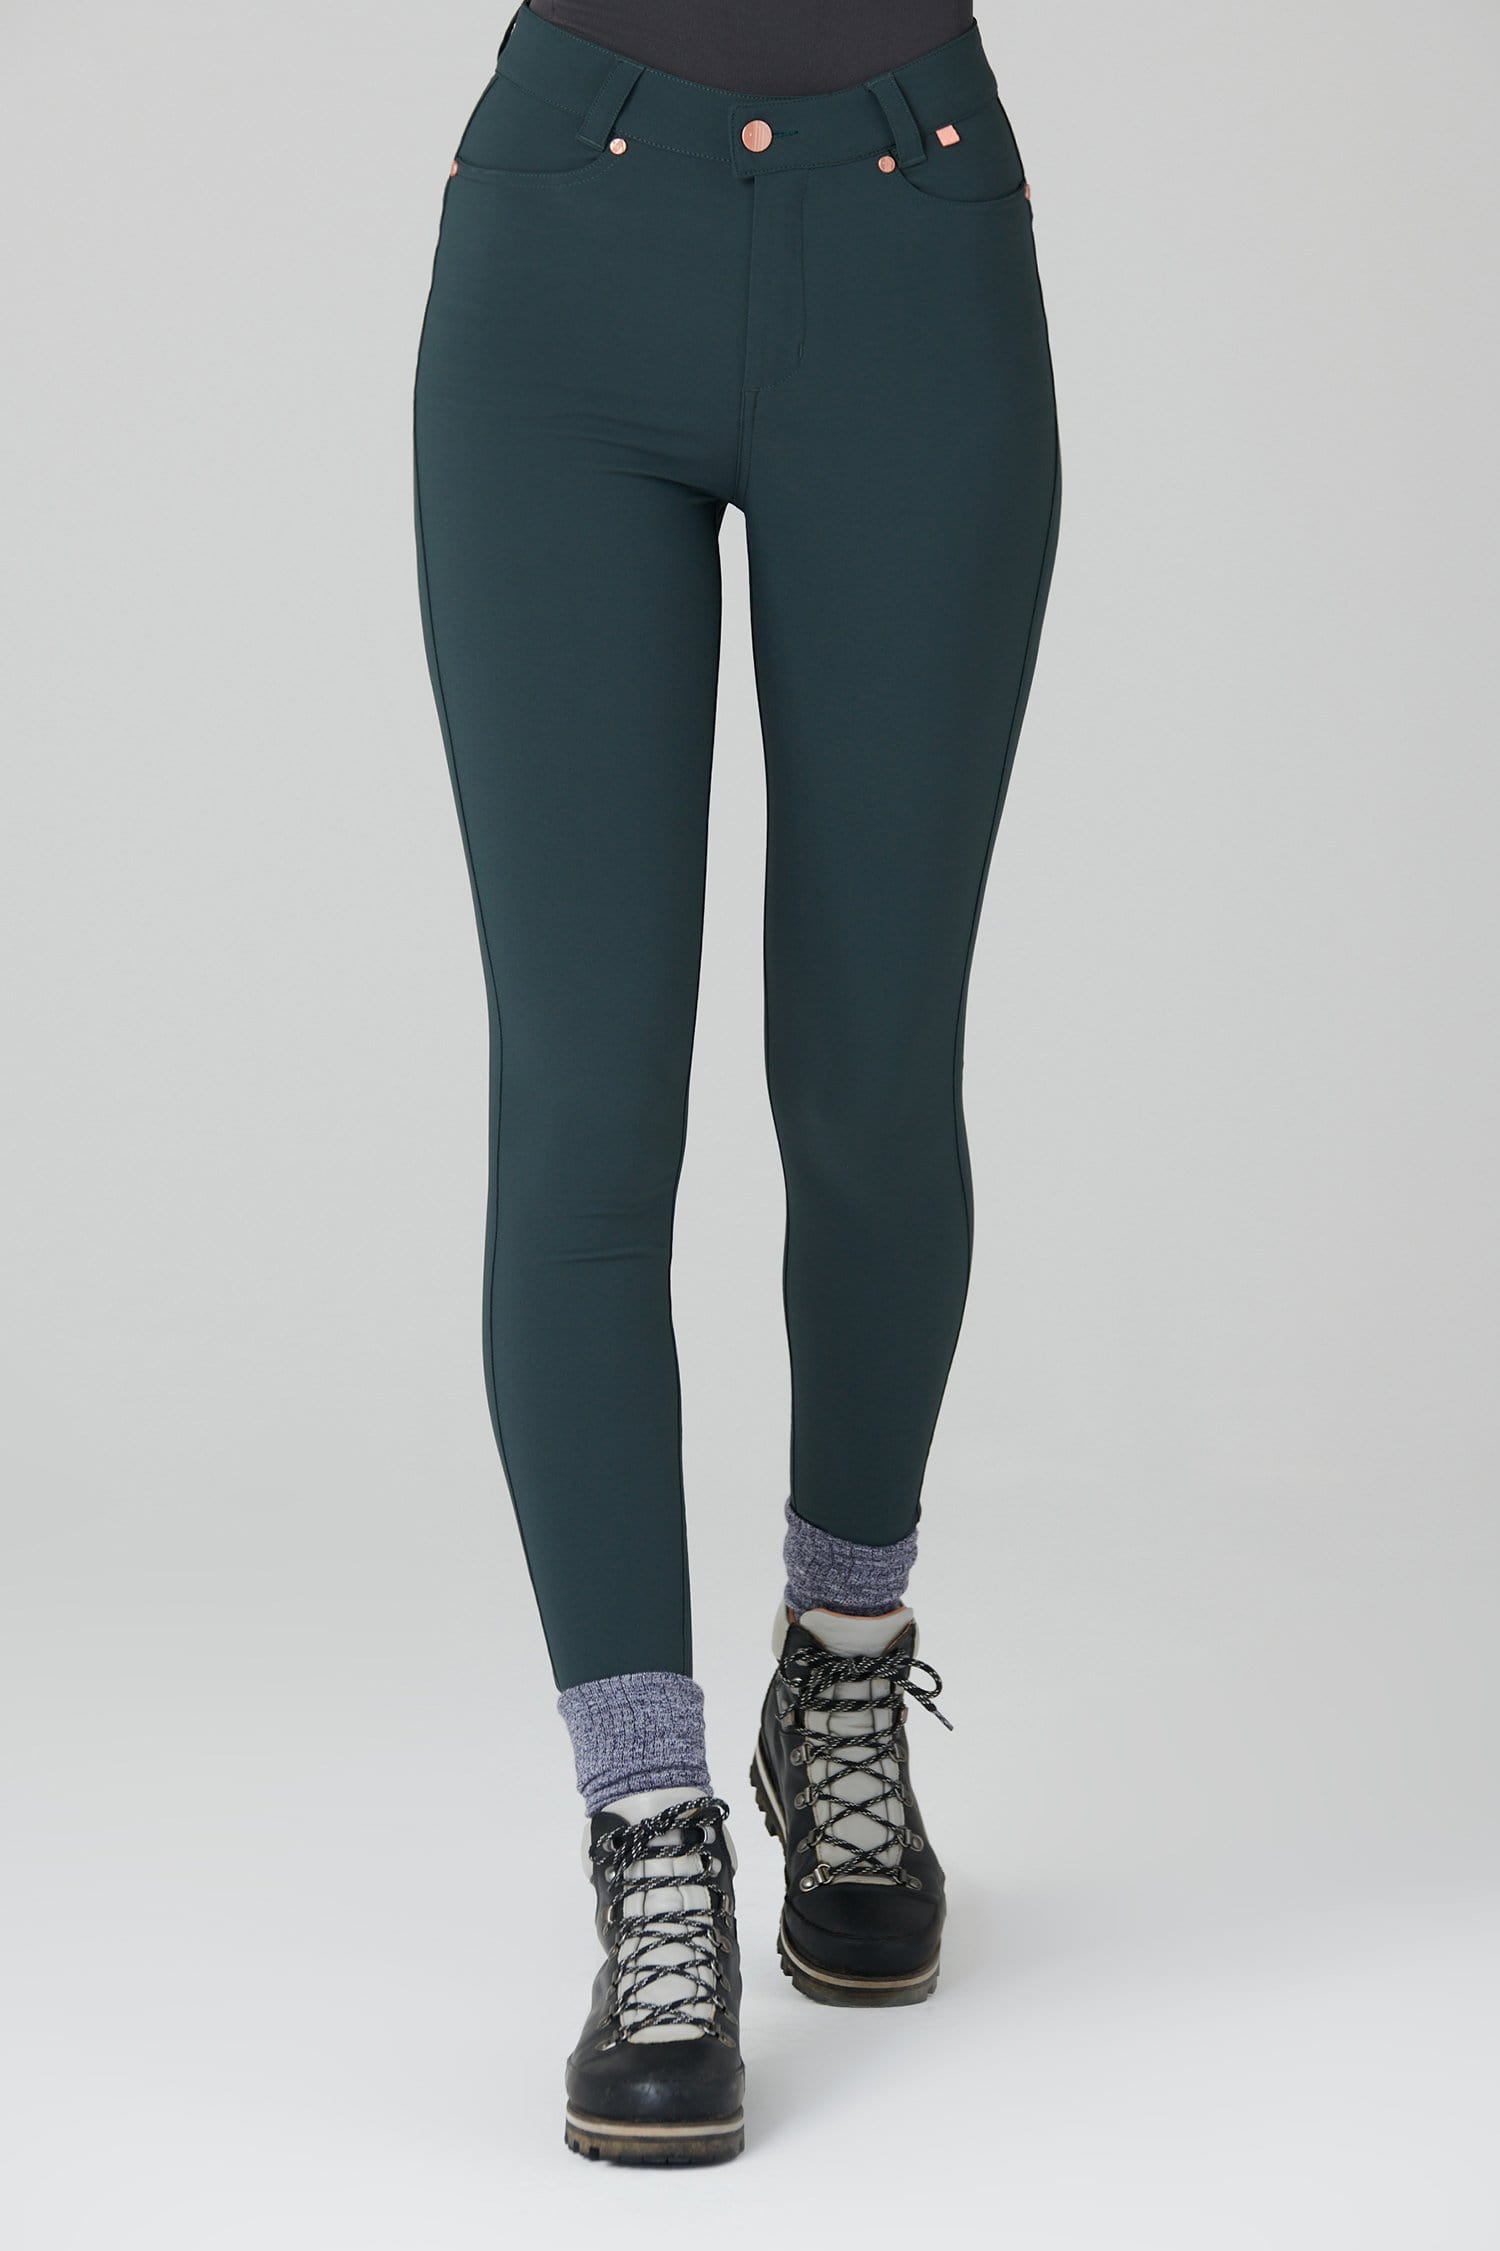 Thermal Skinny Outdoor Trousers - Forest Green - 38l / Uk20 - Womens - Acai Outdoorwear